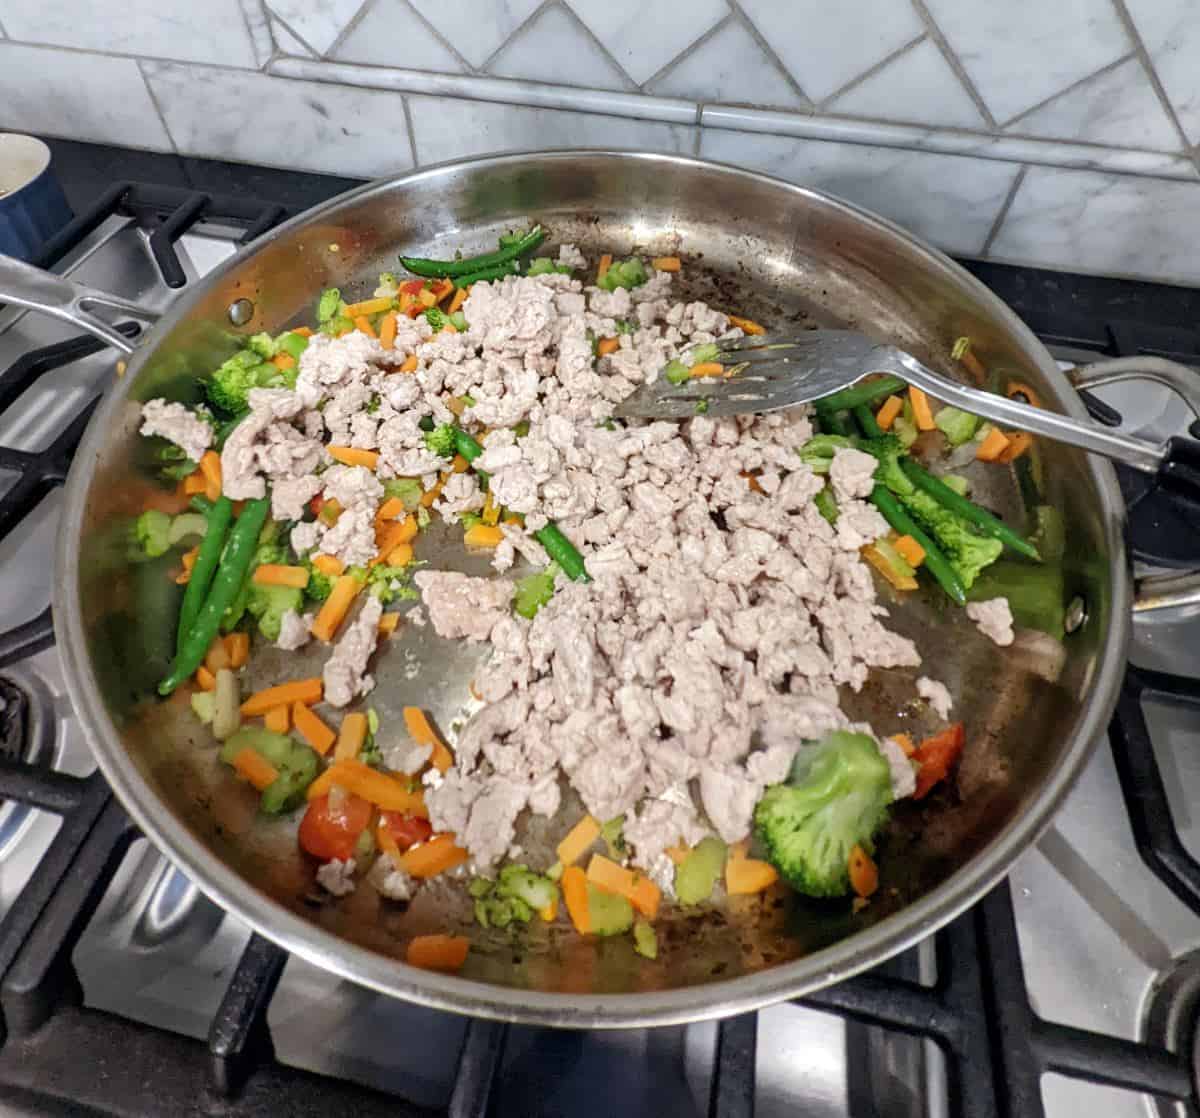 Cooked ground chicken on top of stir fry vegetables in a large metal pan.